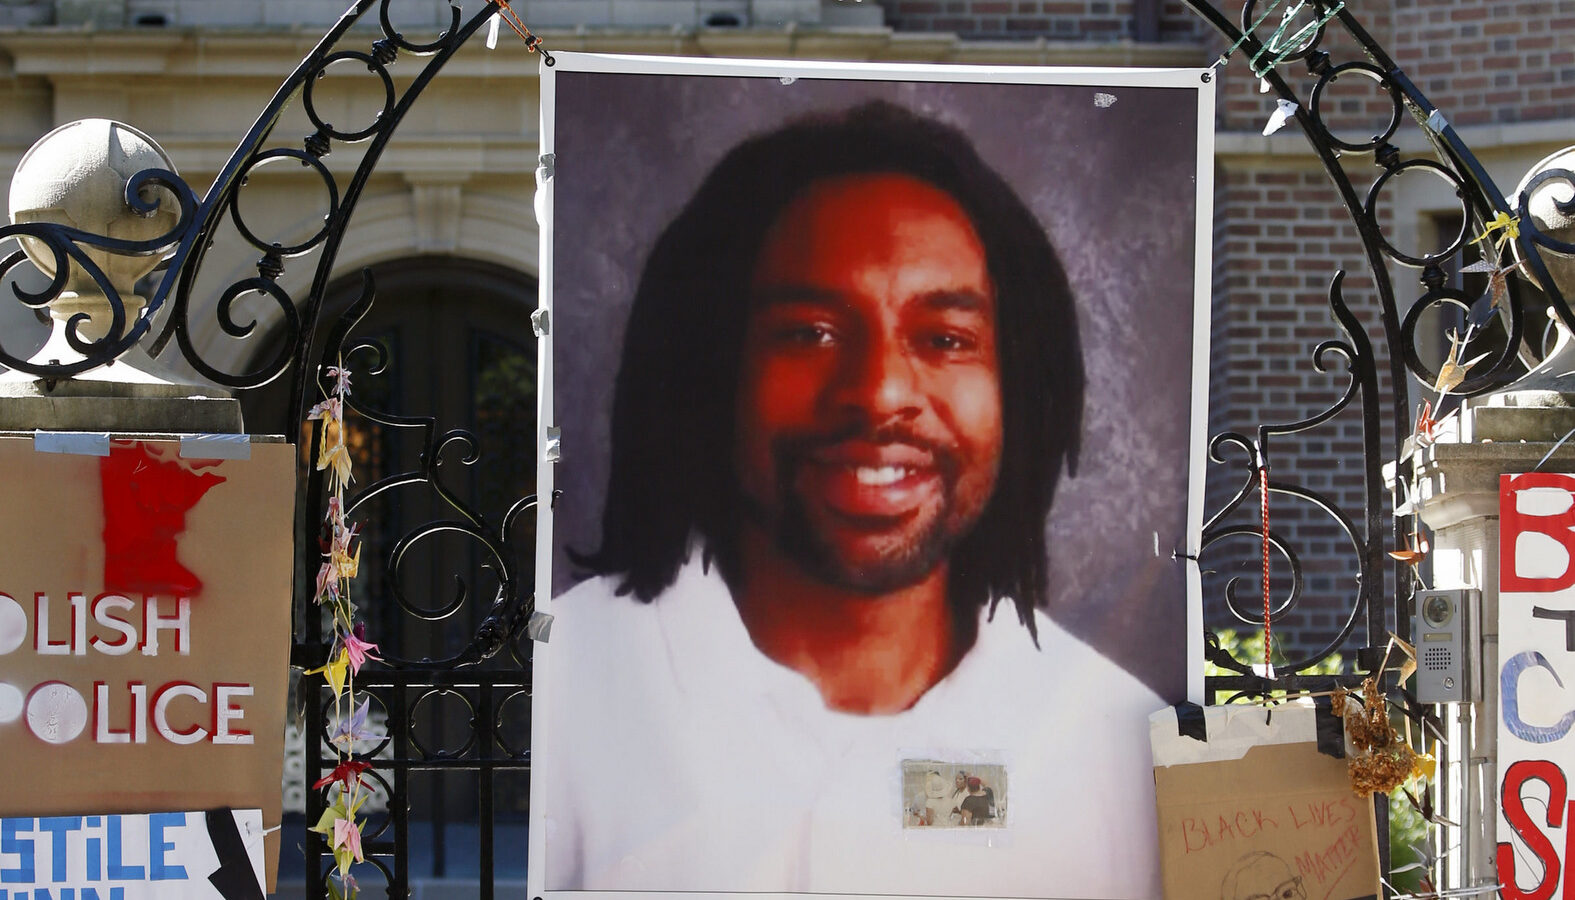 A memorial including a photo of Philando Castile adorns the gate to the governor's residence where protesters demonstrated in St. Paul, Minn., against the July 6 shooting death of Castile. (AP/Jim Mone)